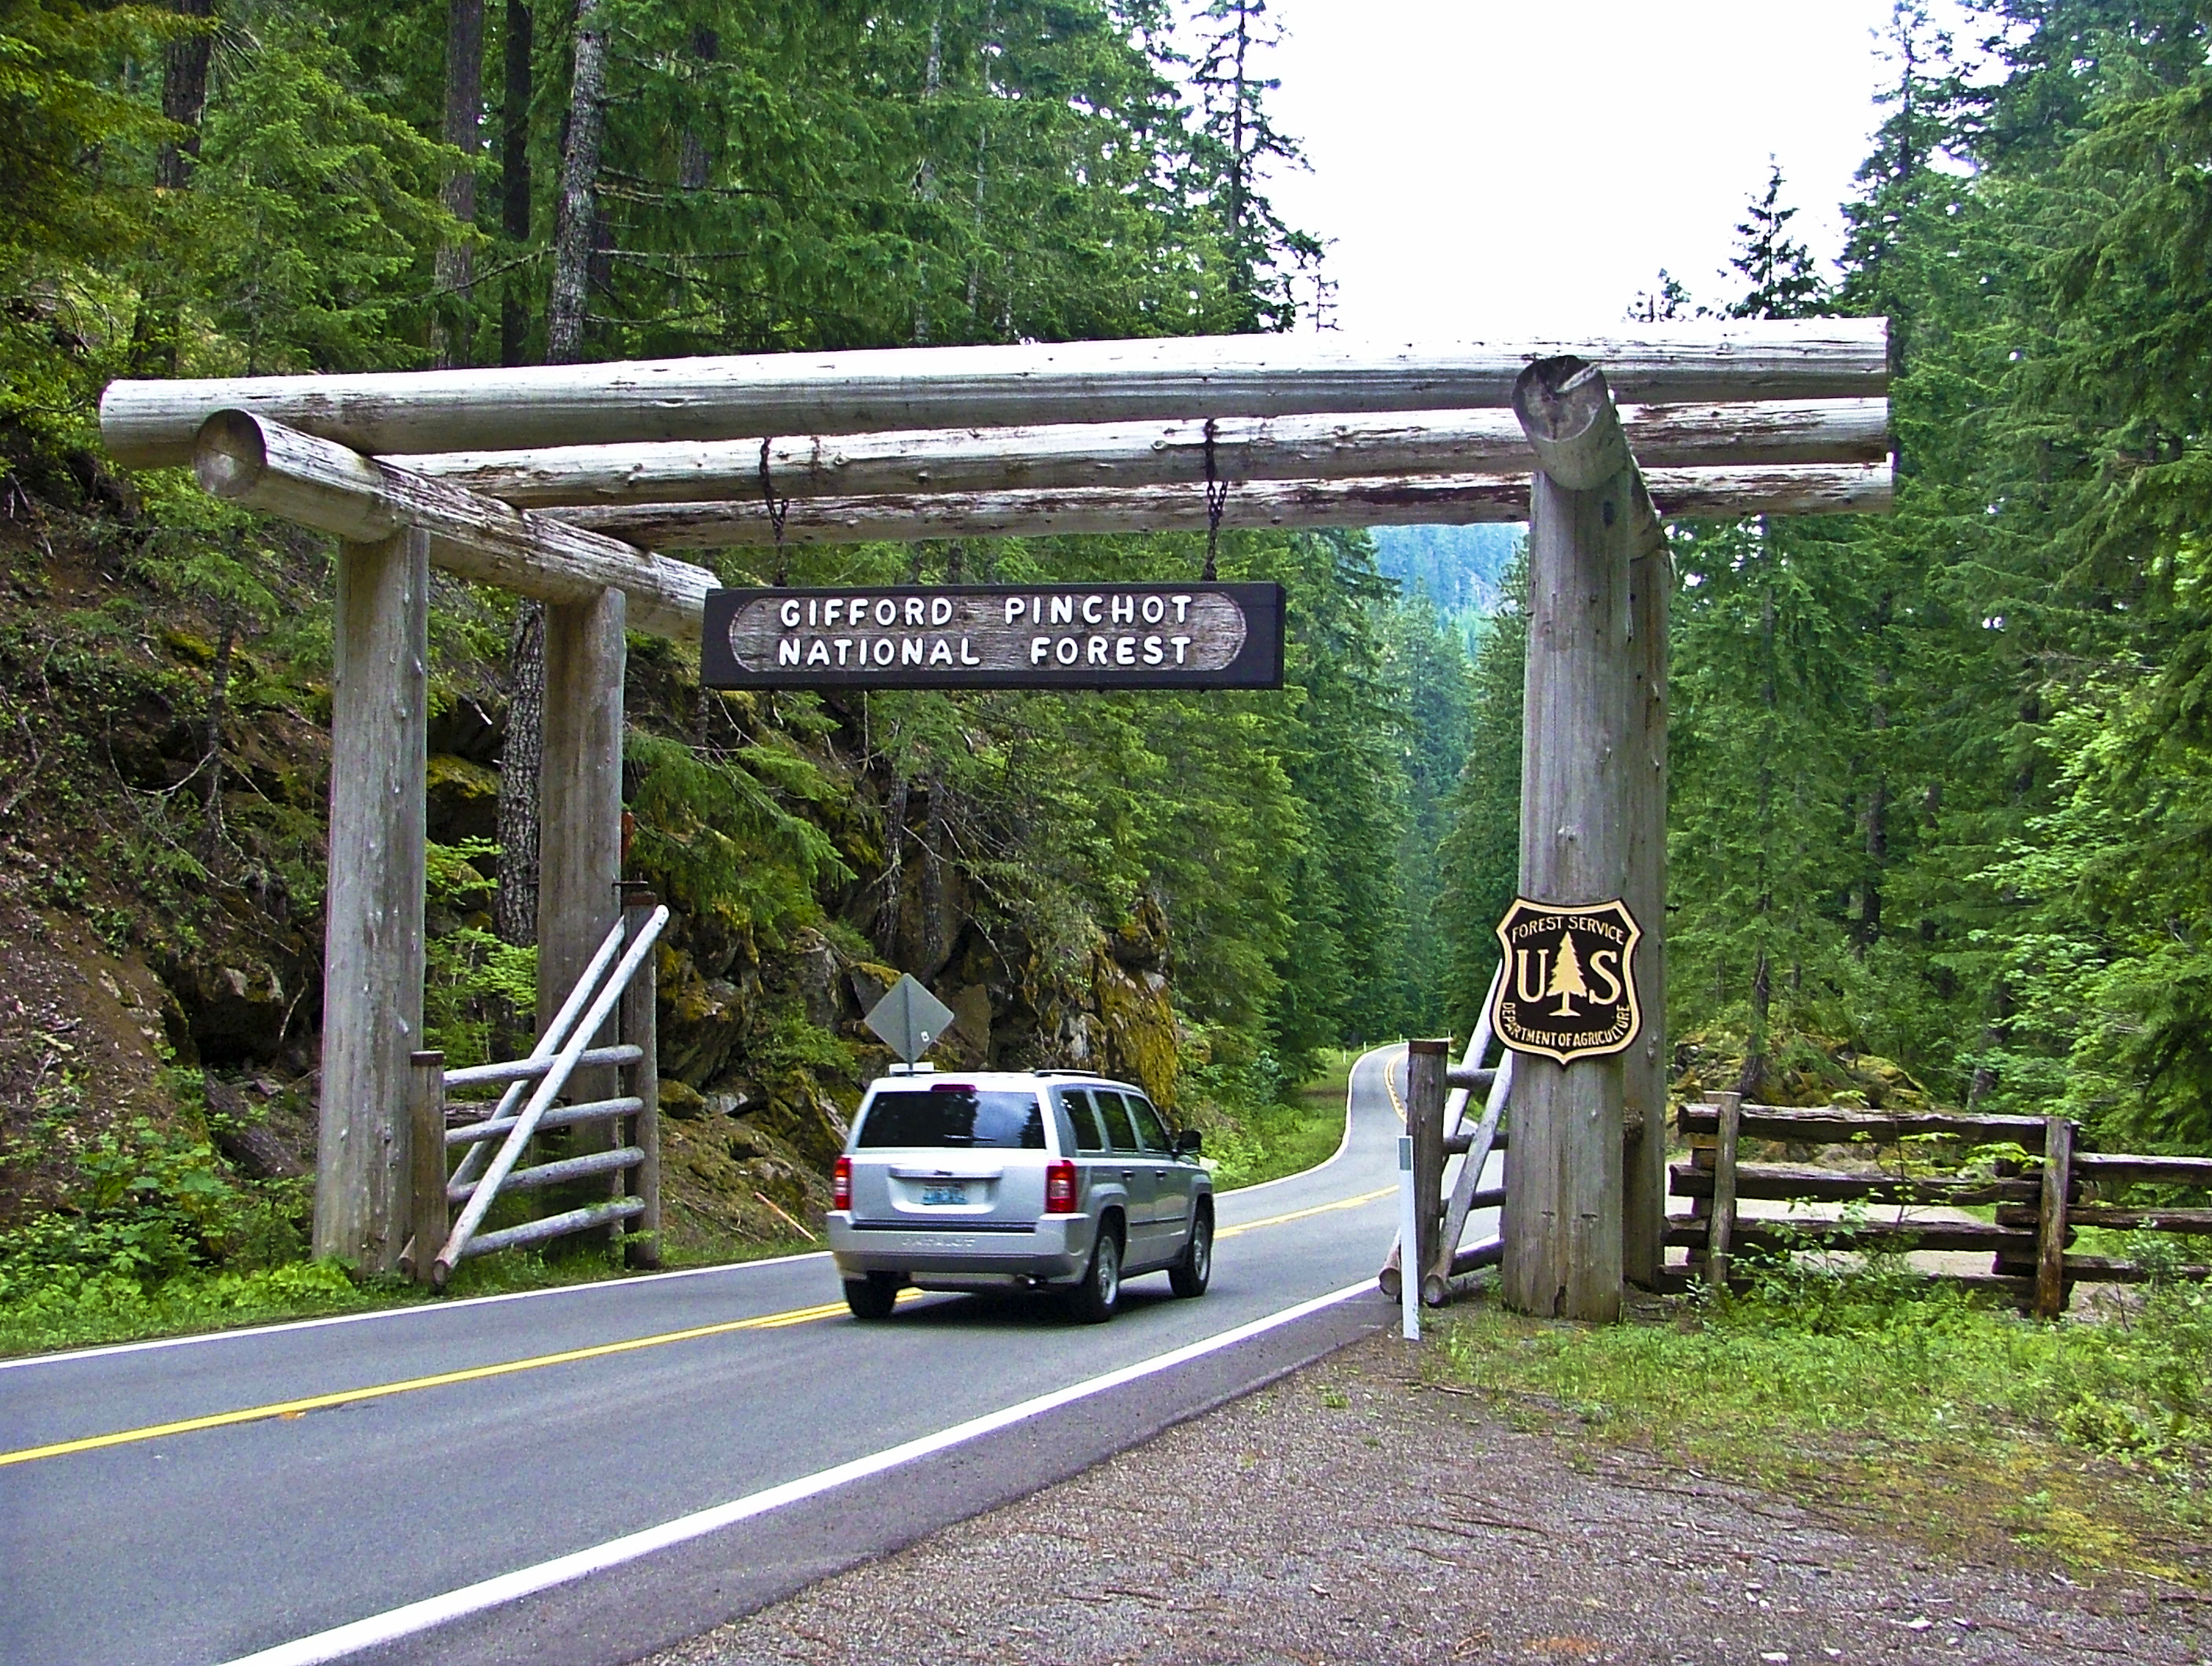 Entrance to Gifford Pinchot National Forest in Washington state, site of illegal logging